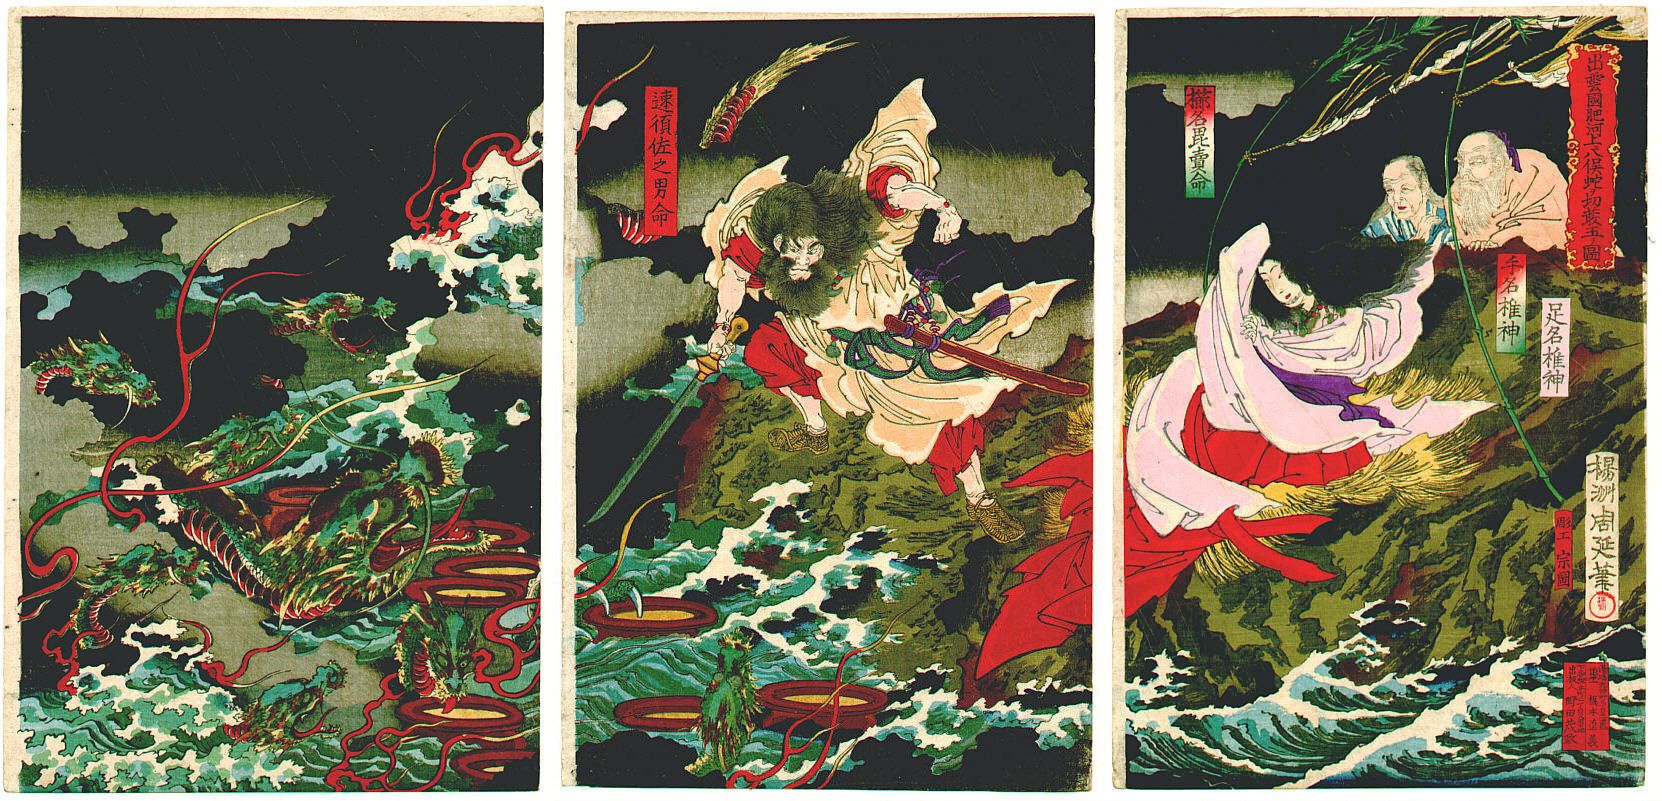 colored woodcut print of the battle betewen susanoo and yamato no orochi, yamato no orochi is in the ocean while susanoo swings at him with a sword from the land while other deities look on